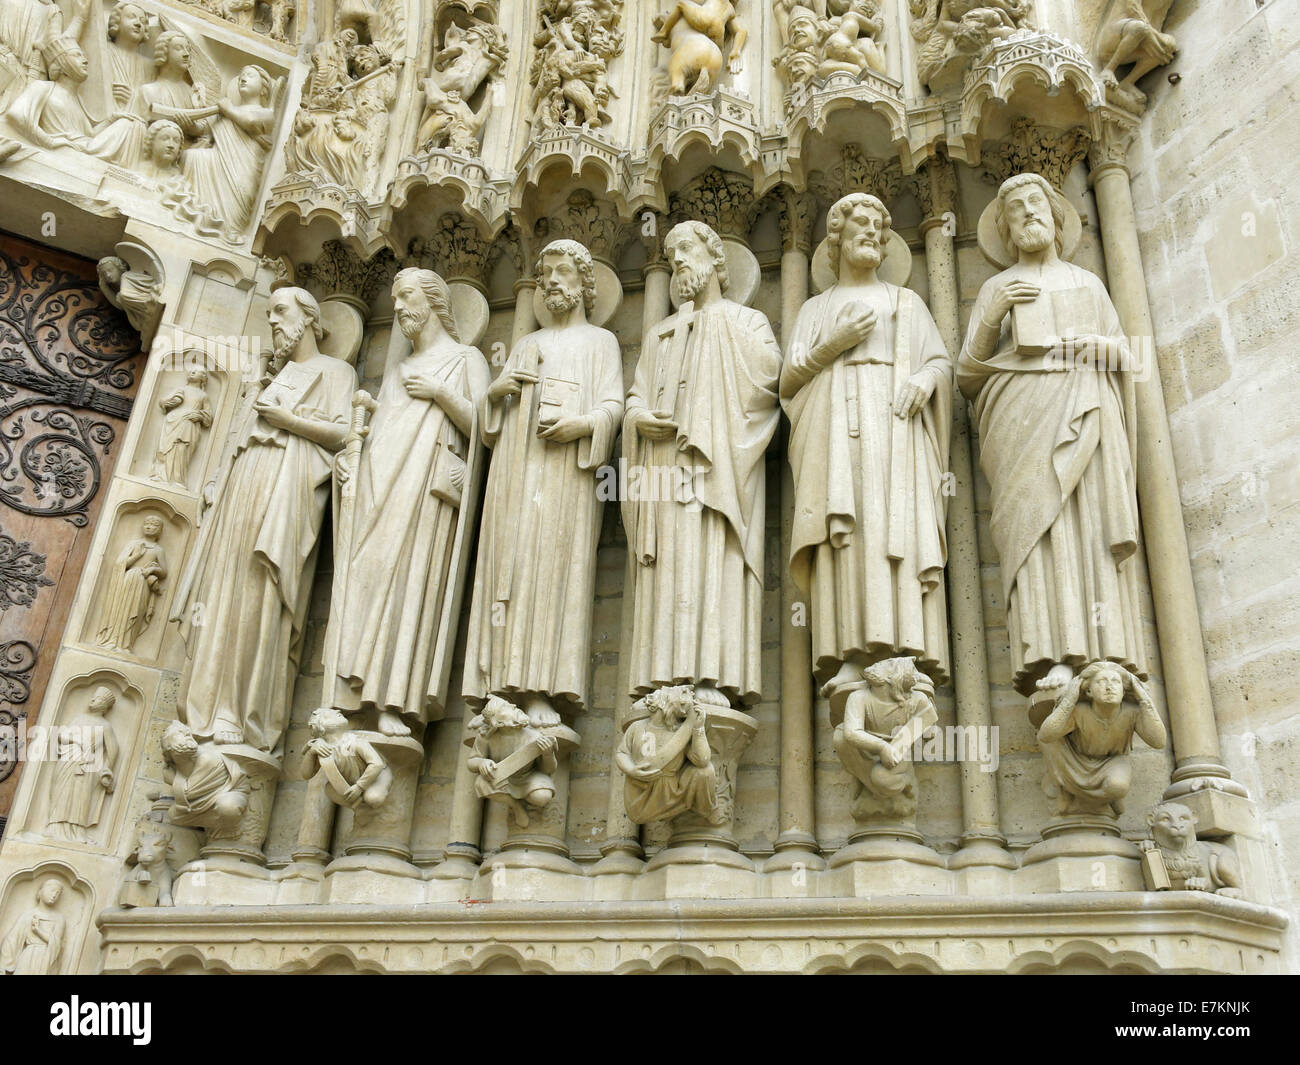 Statues on the front facade of Notre-Dame cathedral, Paris, France. Stock Photo